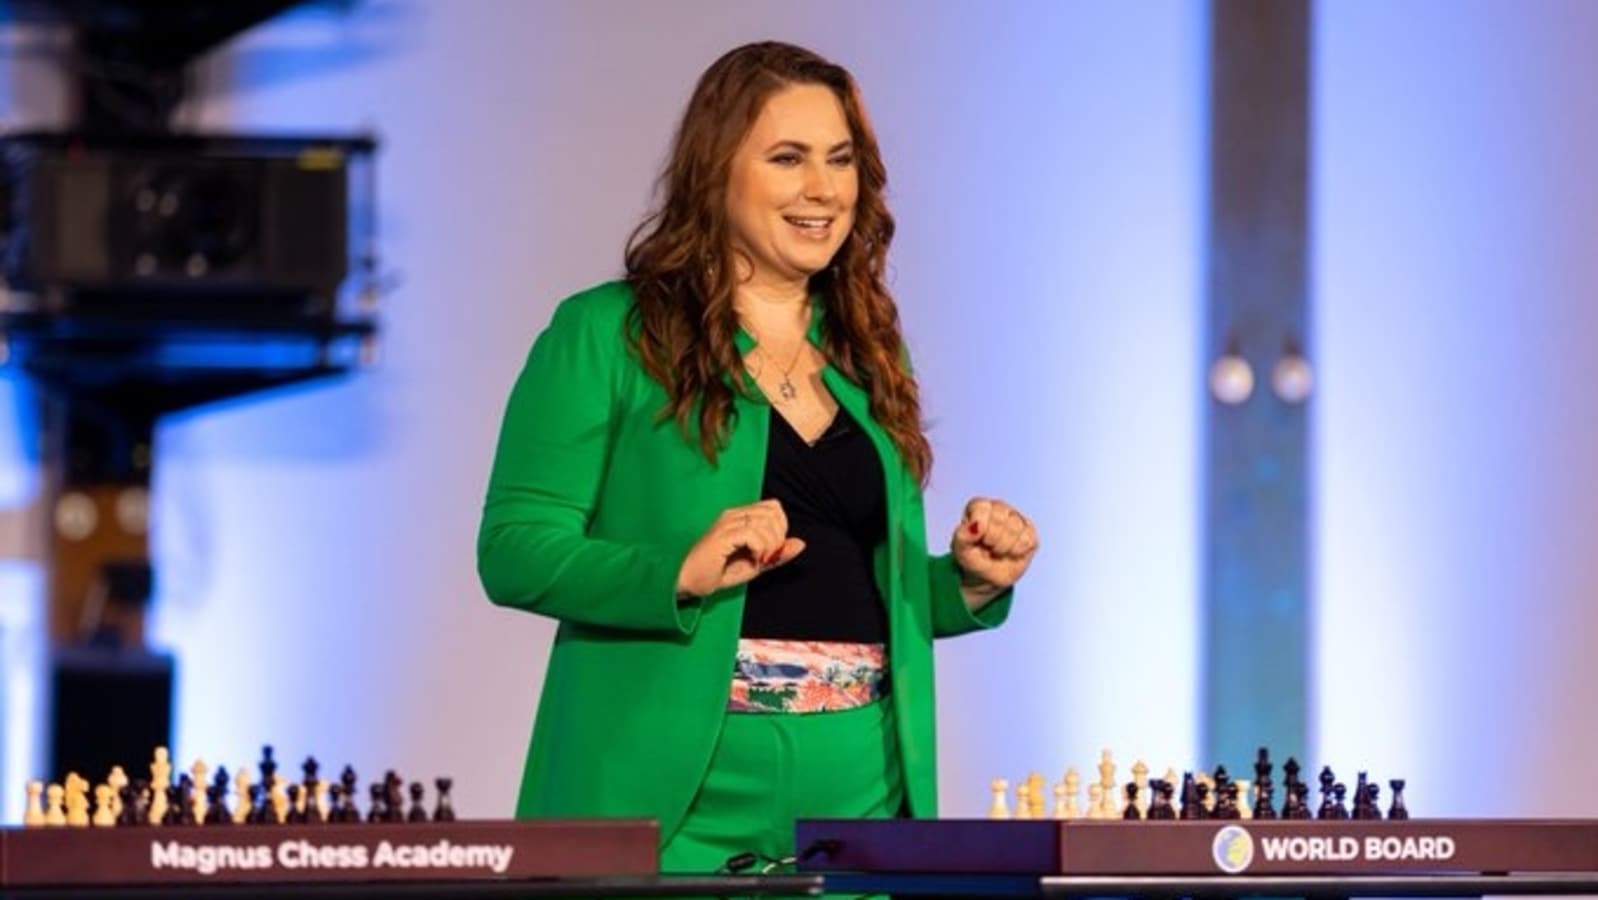 Chess Daily News by Susan Polgar - Magnus at the top of the world